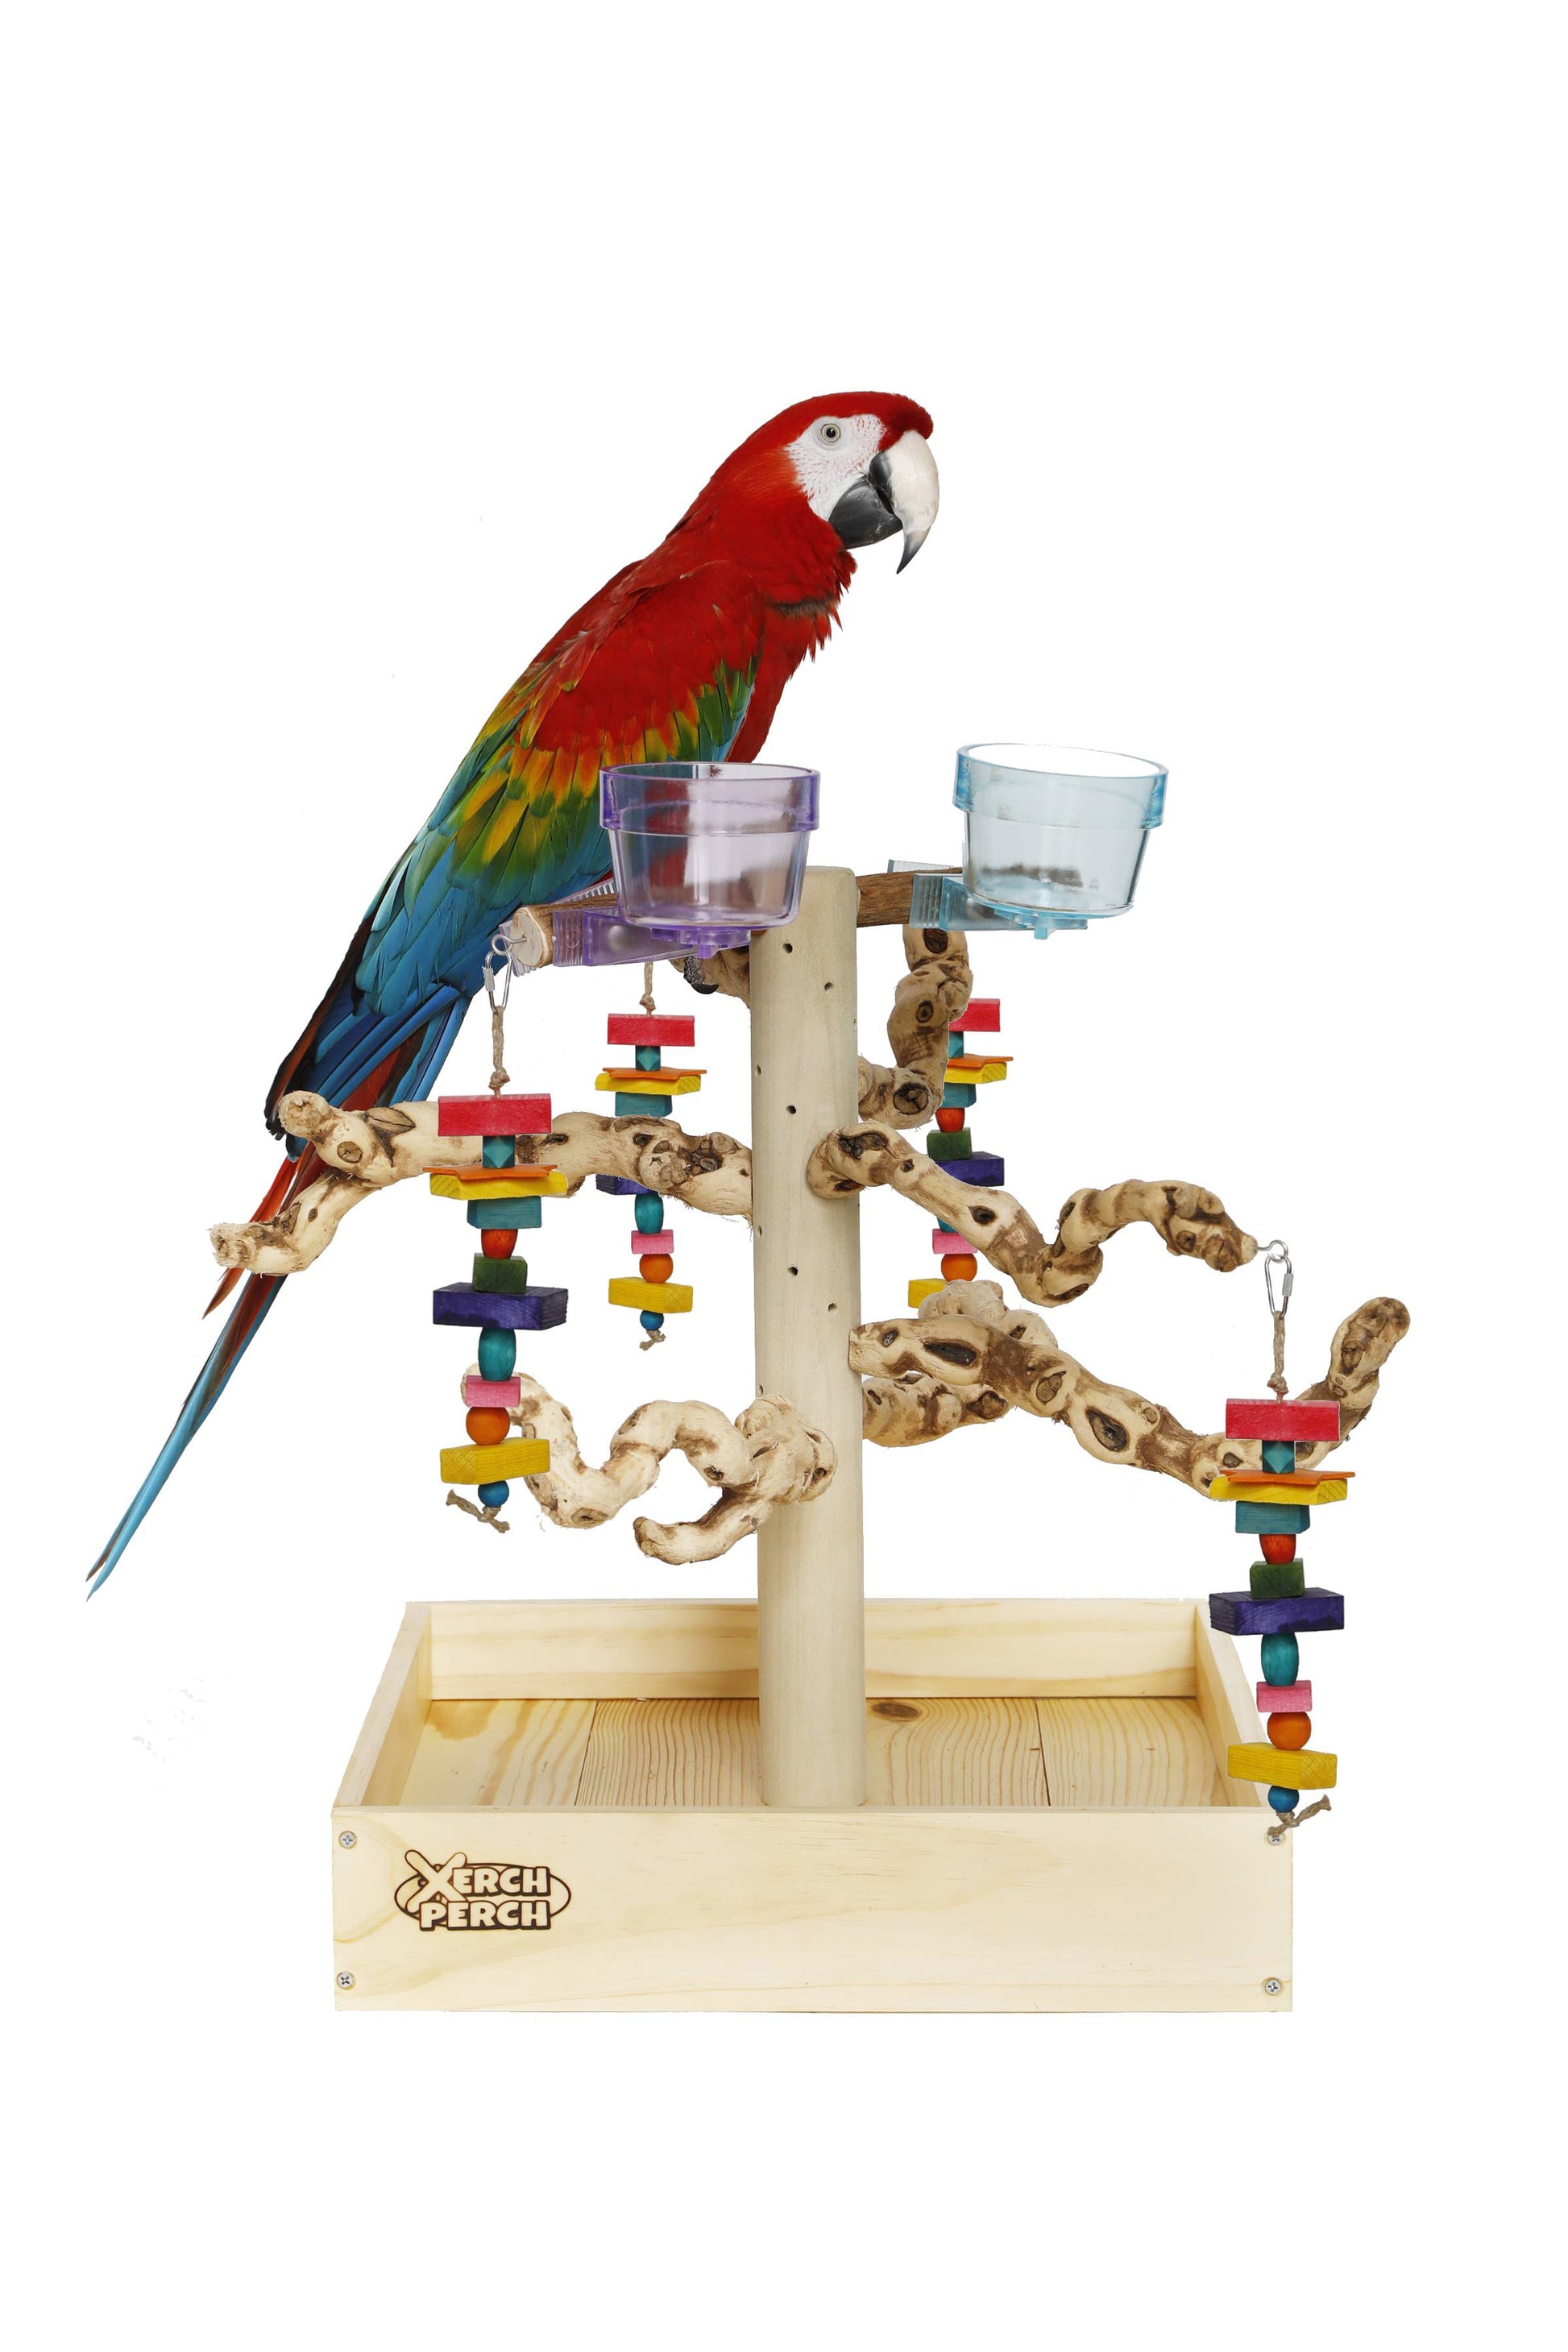 Natural Wood Parrot Stand Perch – The Parrot Mom, LLC